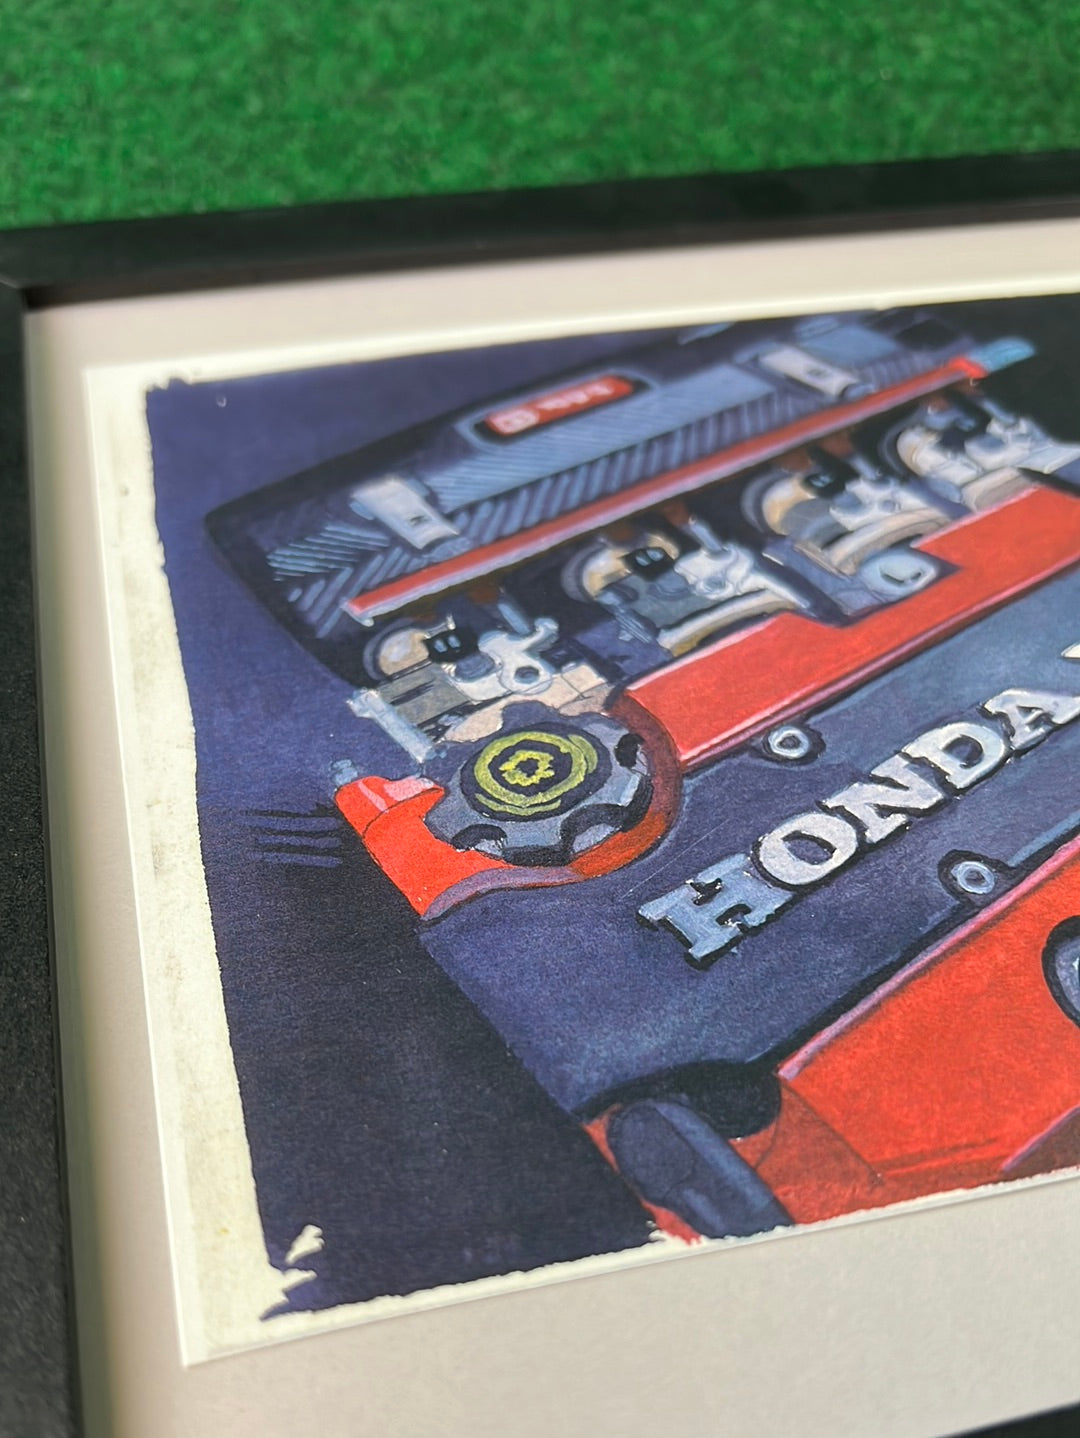 UNDERDOGZ - Honda S2000 Engine Framed, Hand Drawn, Watercolor Painted & Signed Print